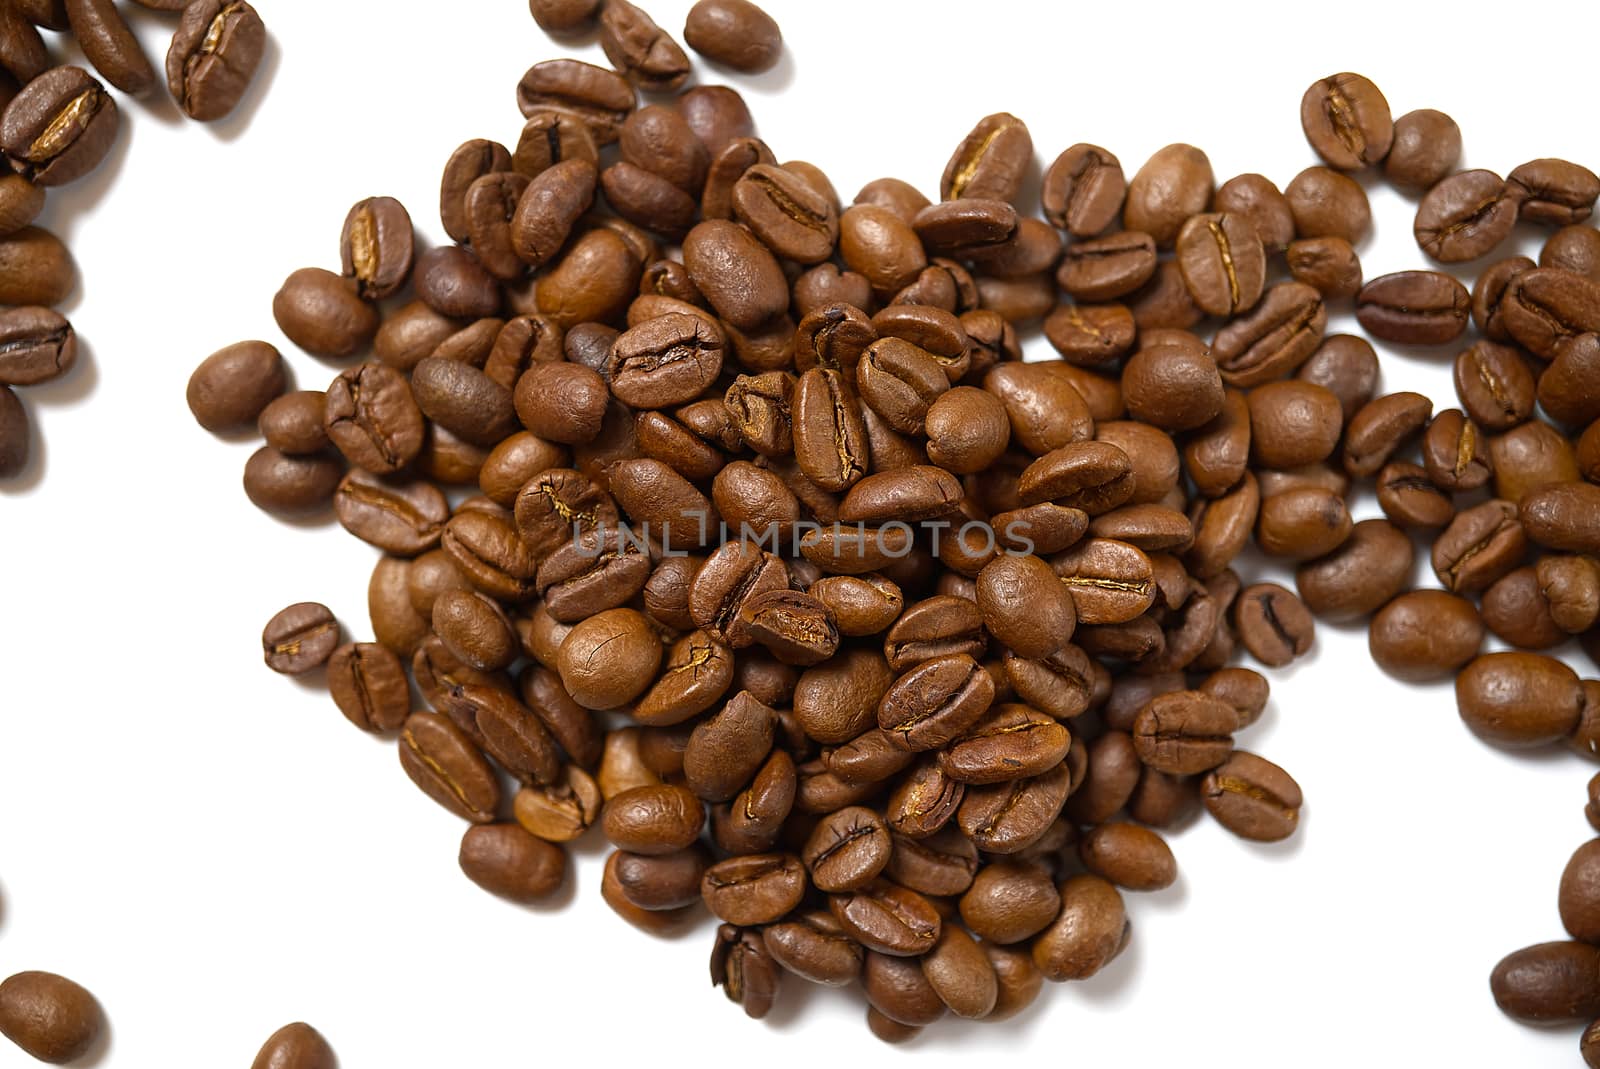 Pile of roasted coffee beans isolated in white background, by PhotoTime